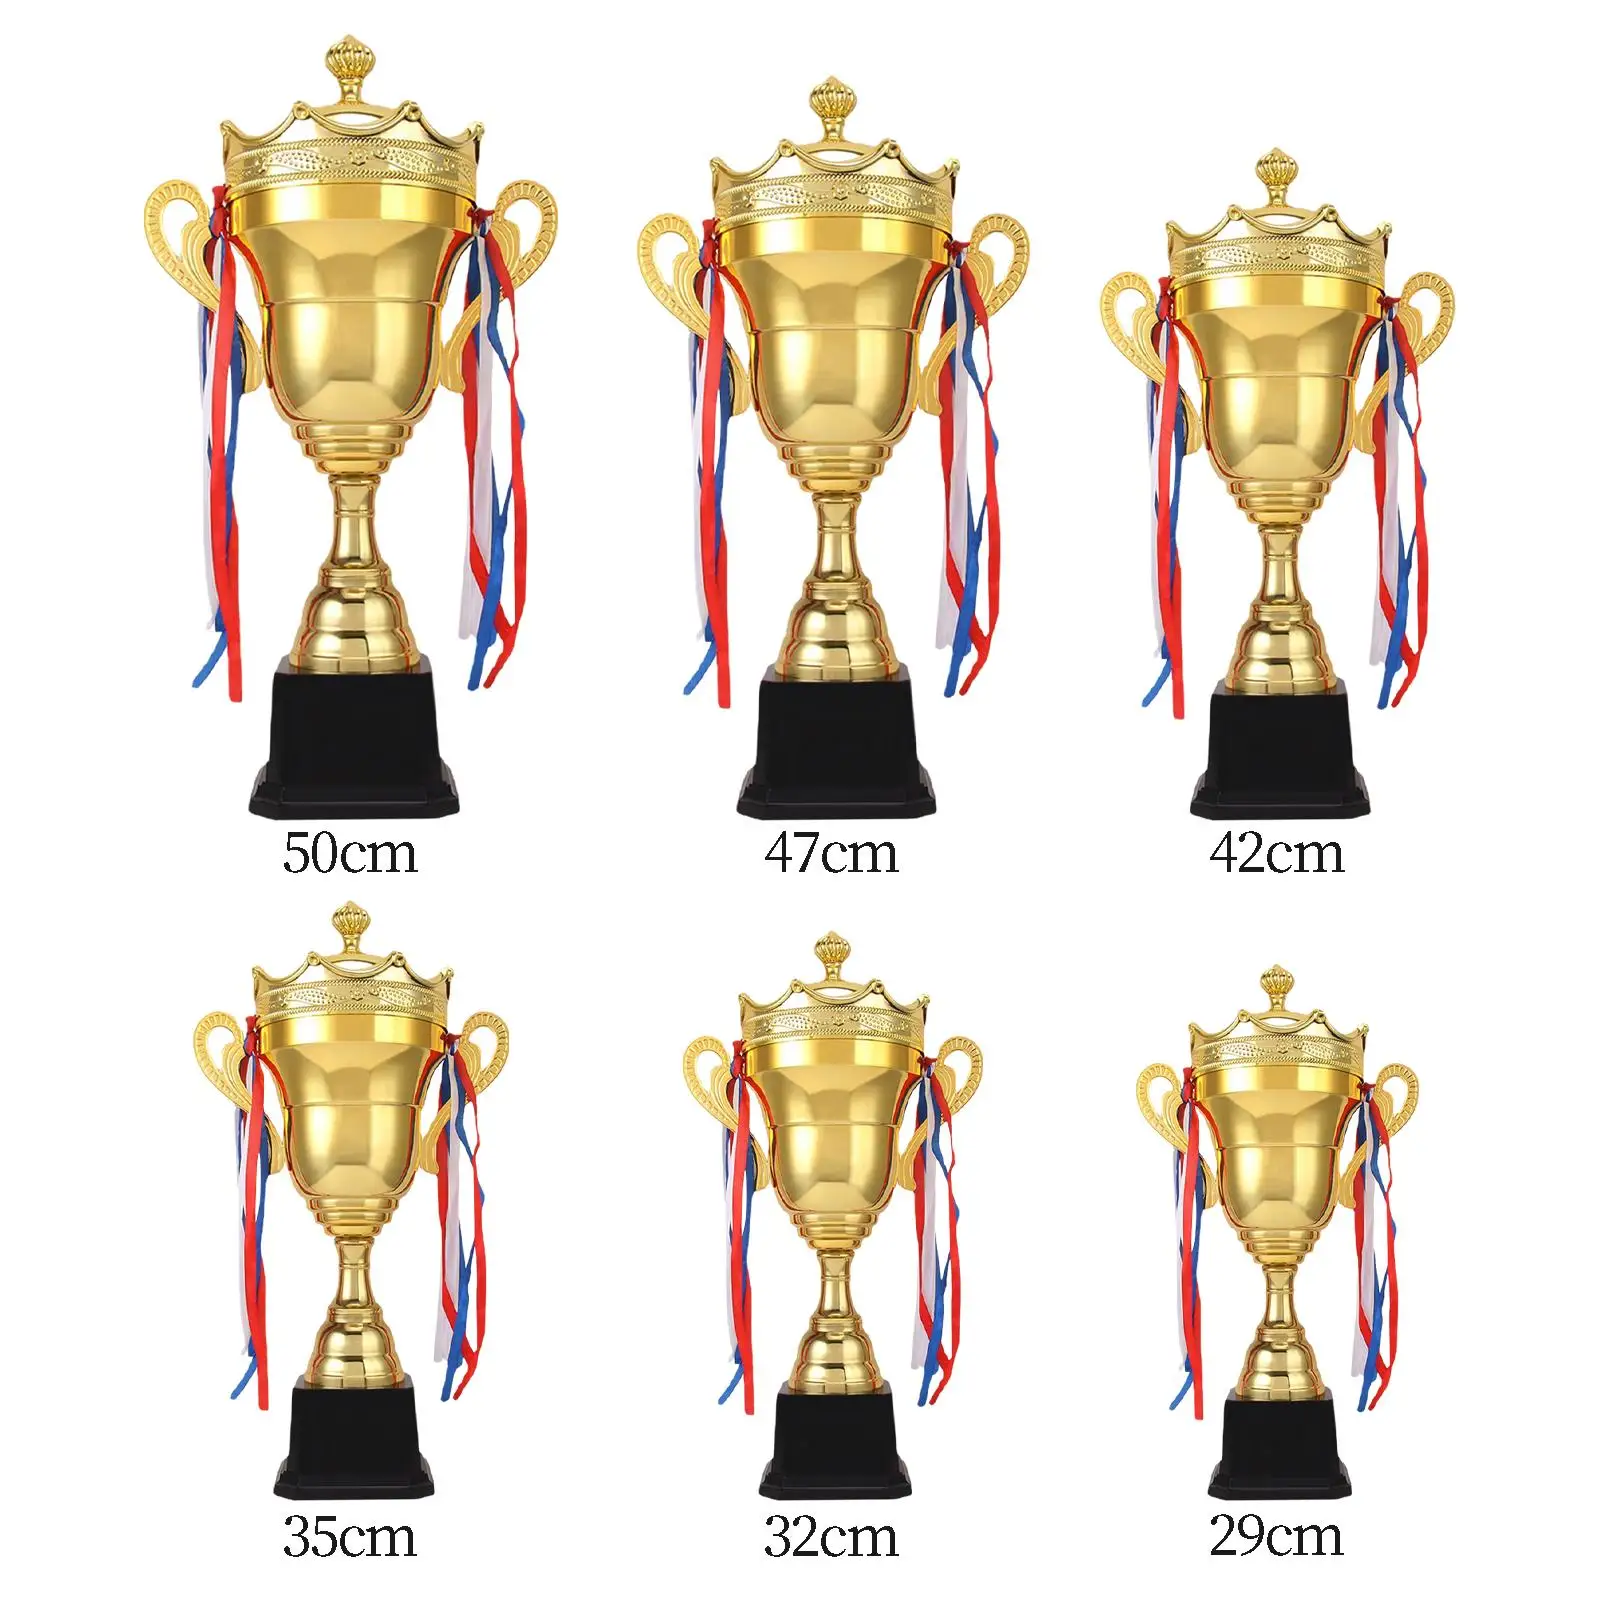 Trophy Cup Decorations Keepsake for Award Competitions Sports Championships School Tournaments Soccer Football League Match